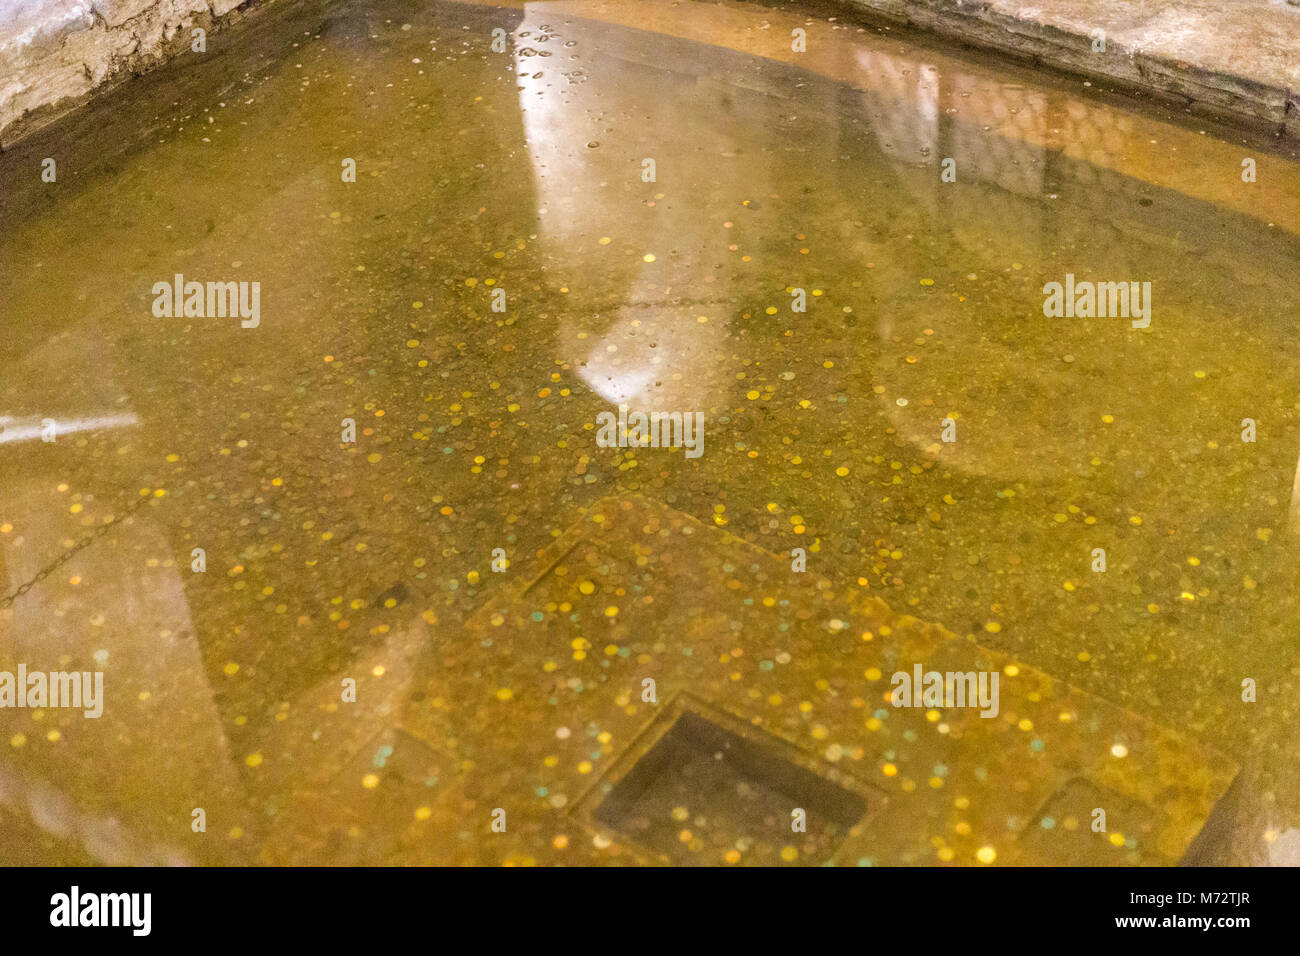 Coins thrown into the water as a superstitious gesture to ask wishes or luck Stock Photo